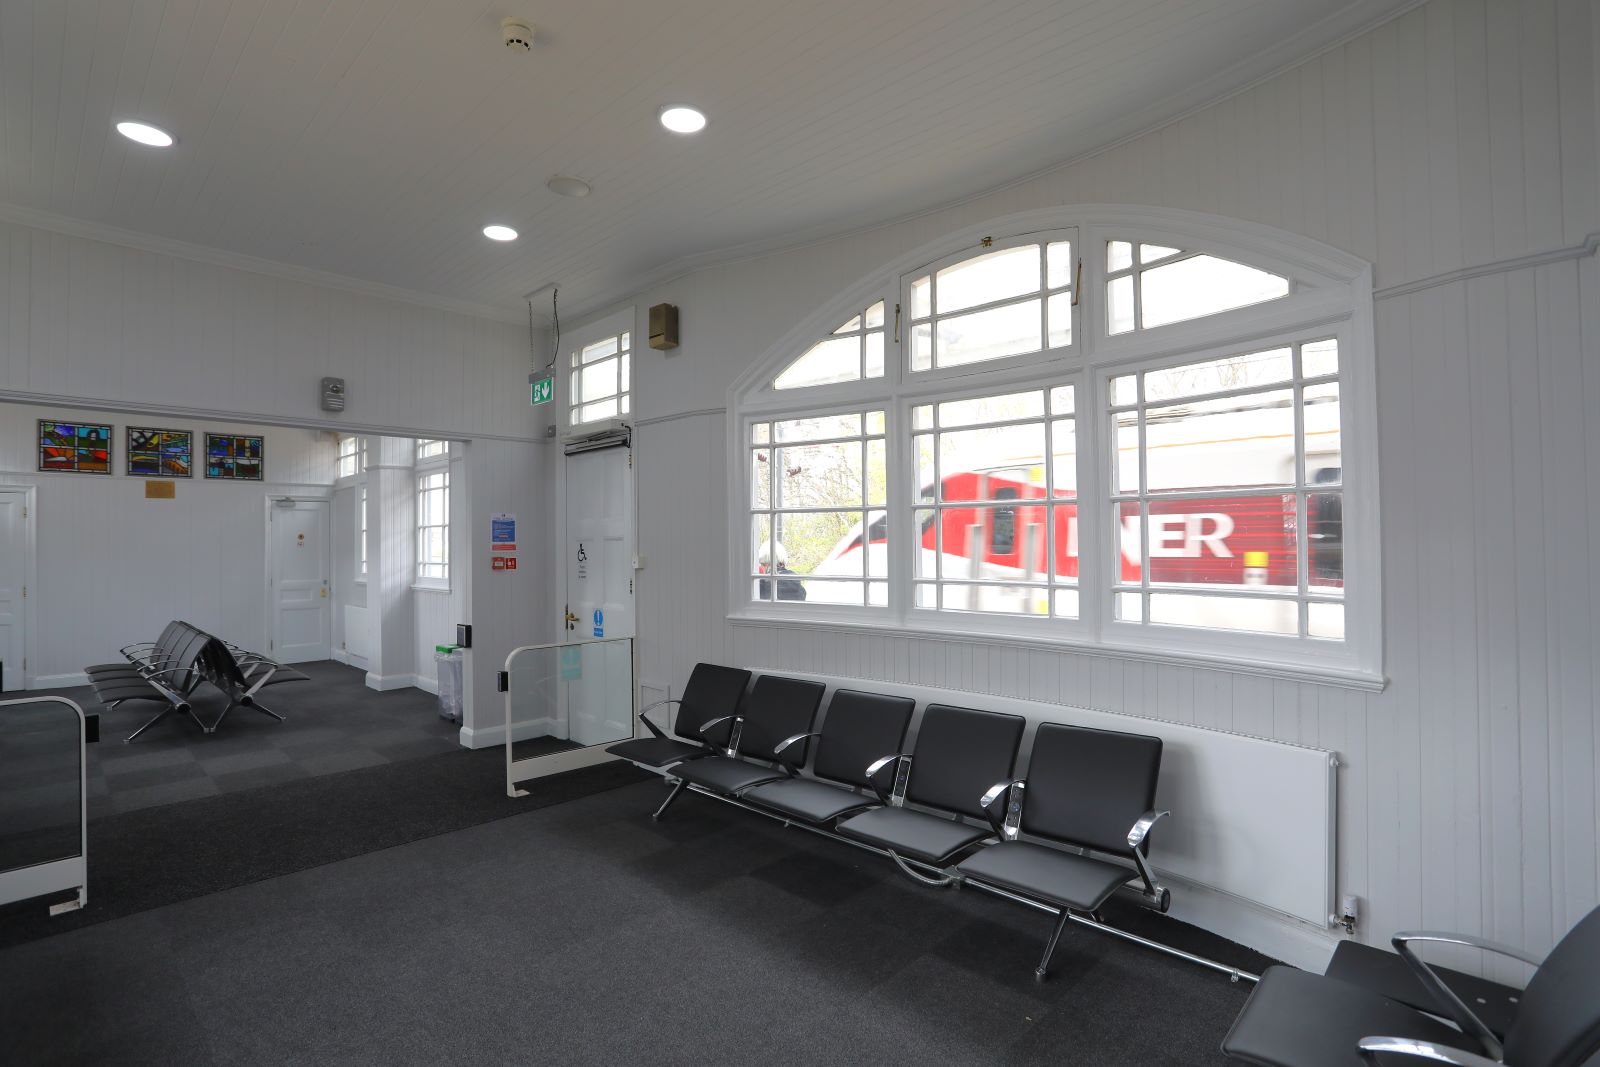 Worth The Wait - LNER's Refurbished Waiting Rooms Are Now Arriving